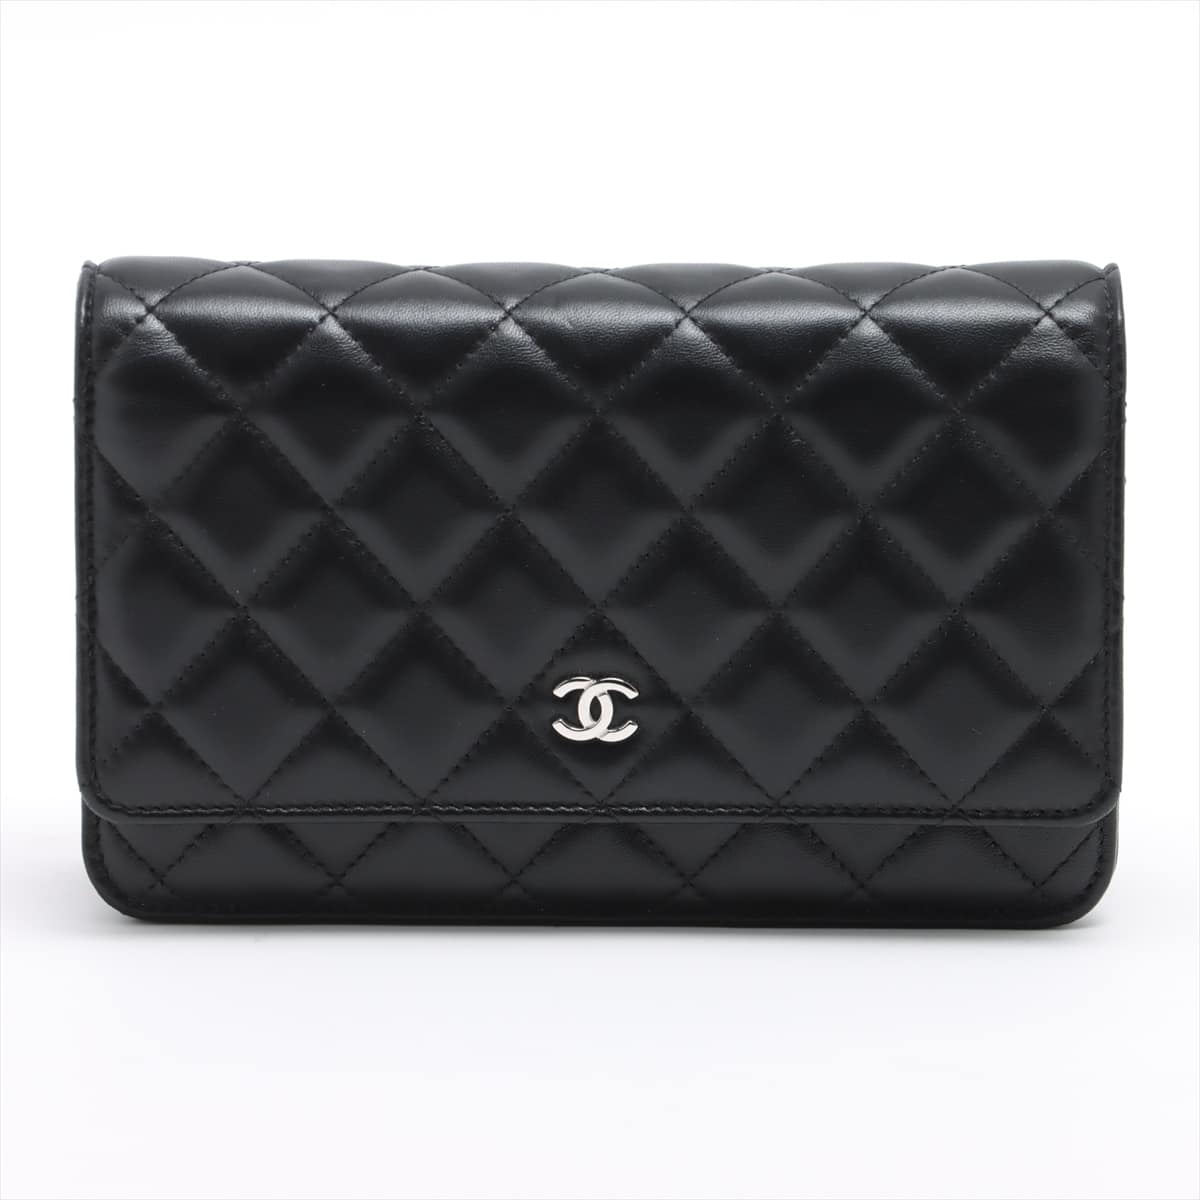 Chanel Matelasse Lambskin Chain wallet Black Silver Metal fittings There is an IC chip